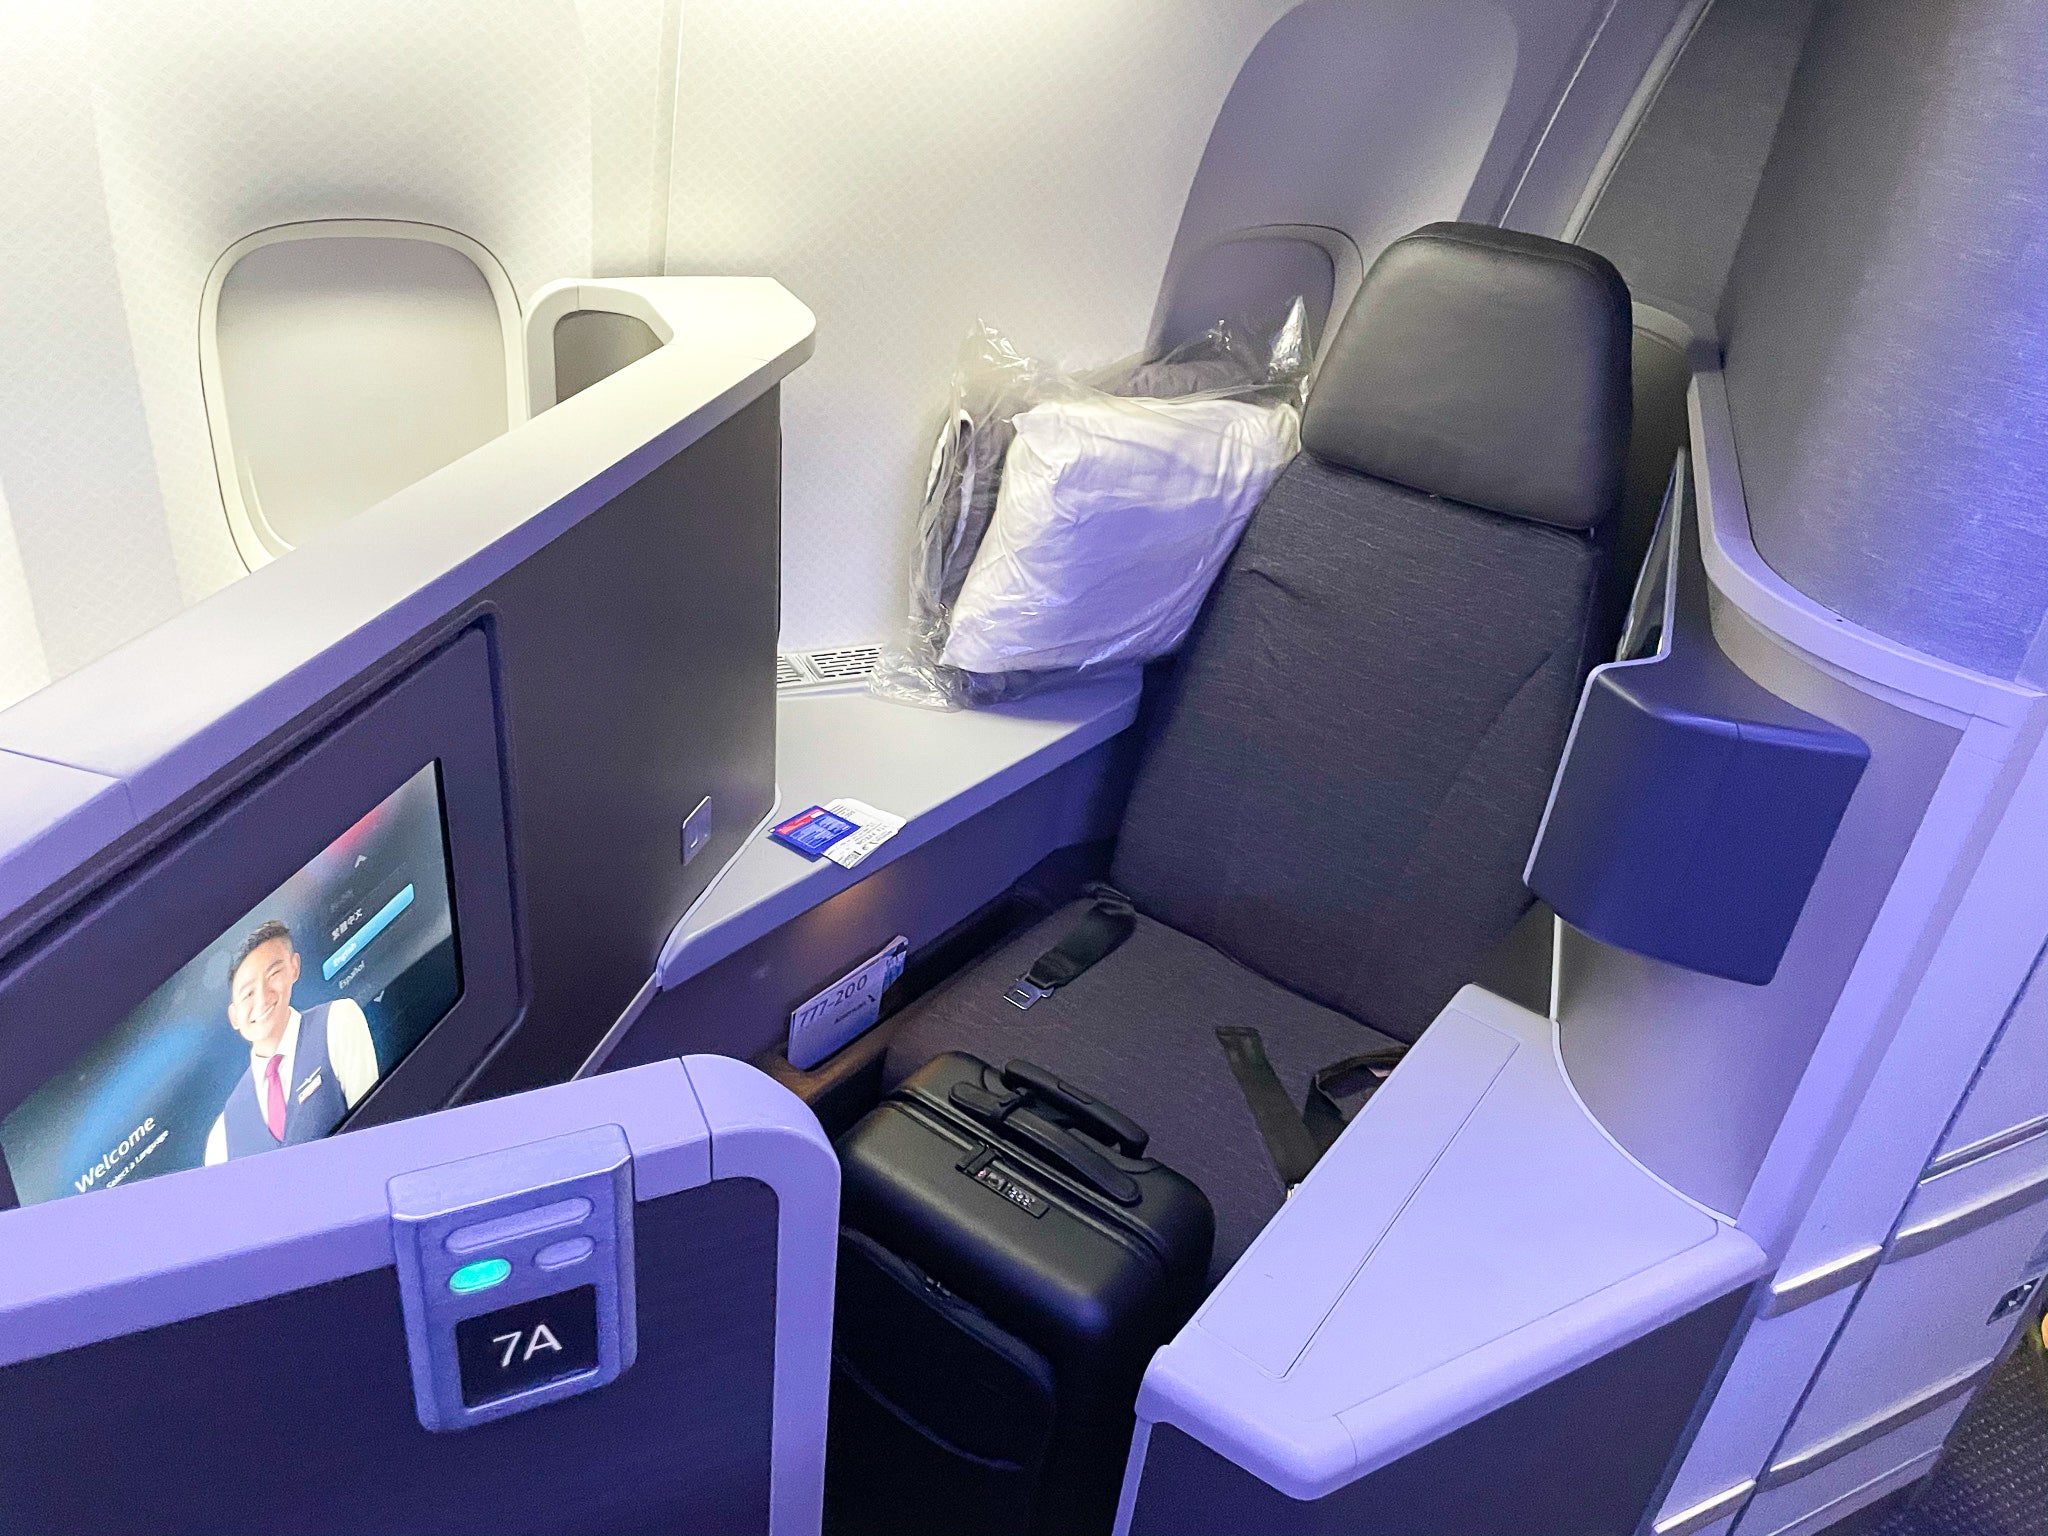 American Airlines 777 Flagship Business Class rear facing seat